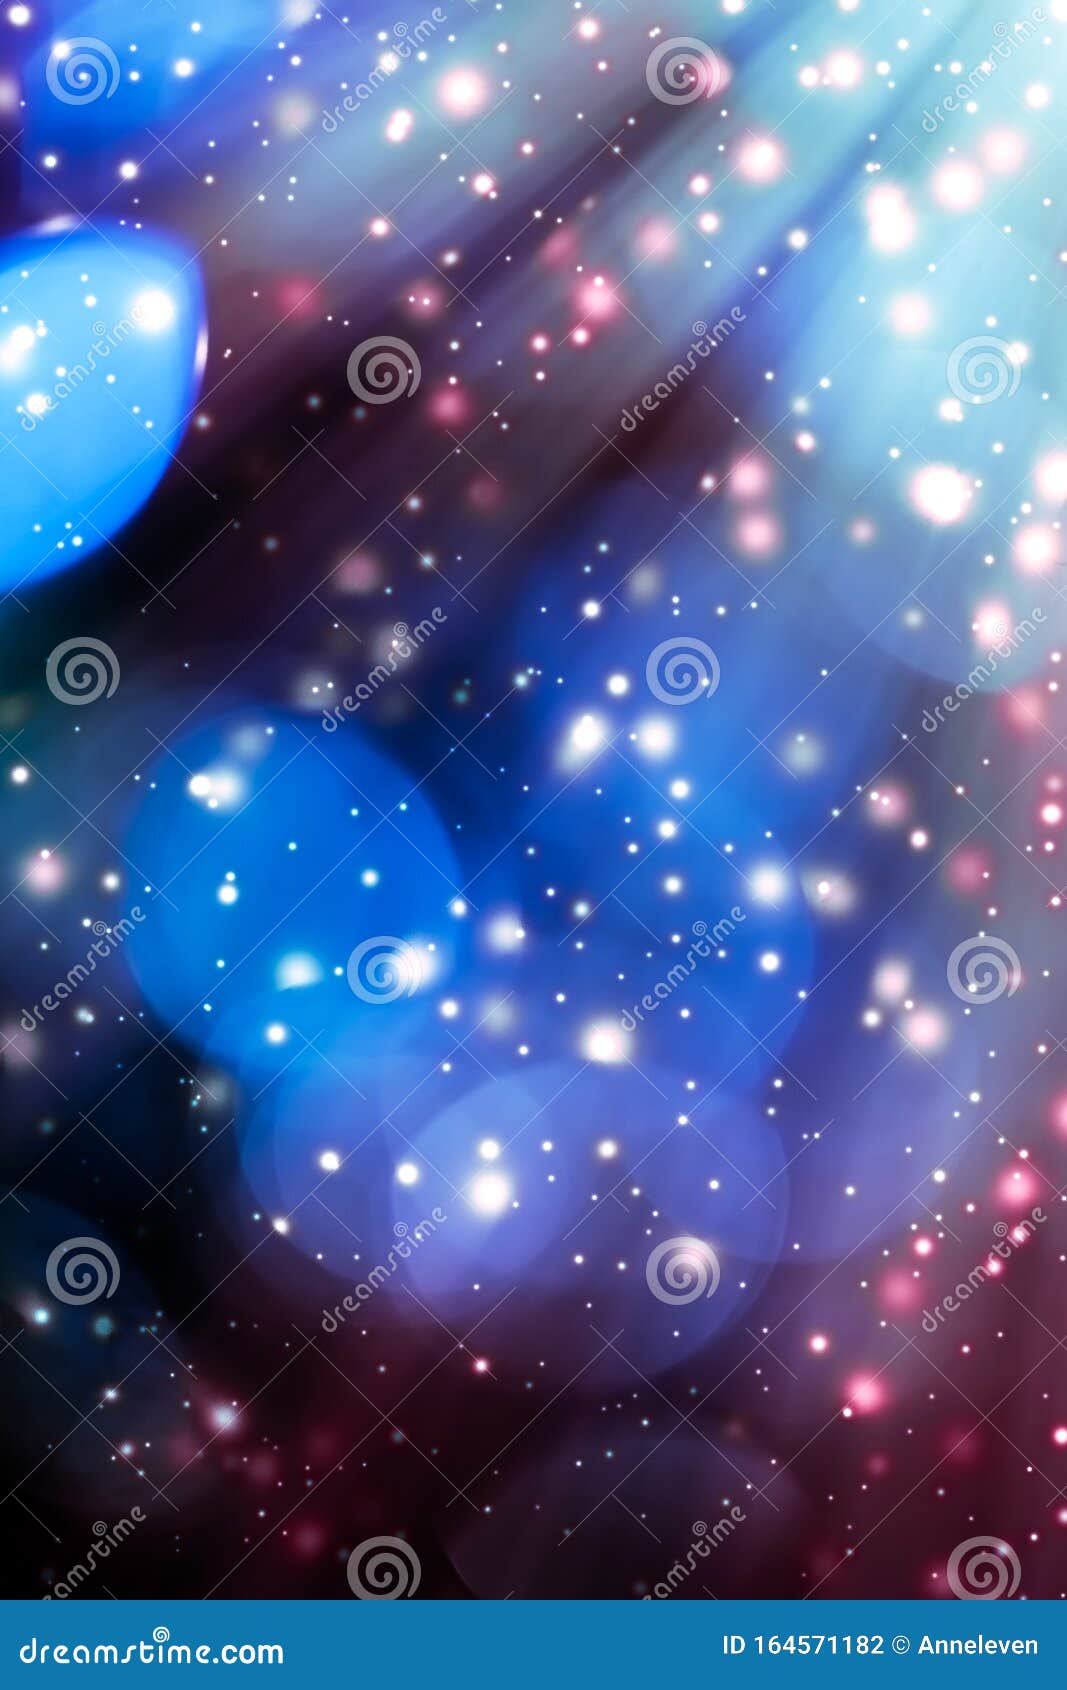 Abstract Cosmic Starry Sky Lights and Shiny Glitter, Luxury Holiday ...